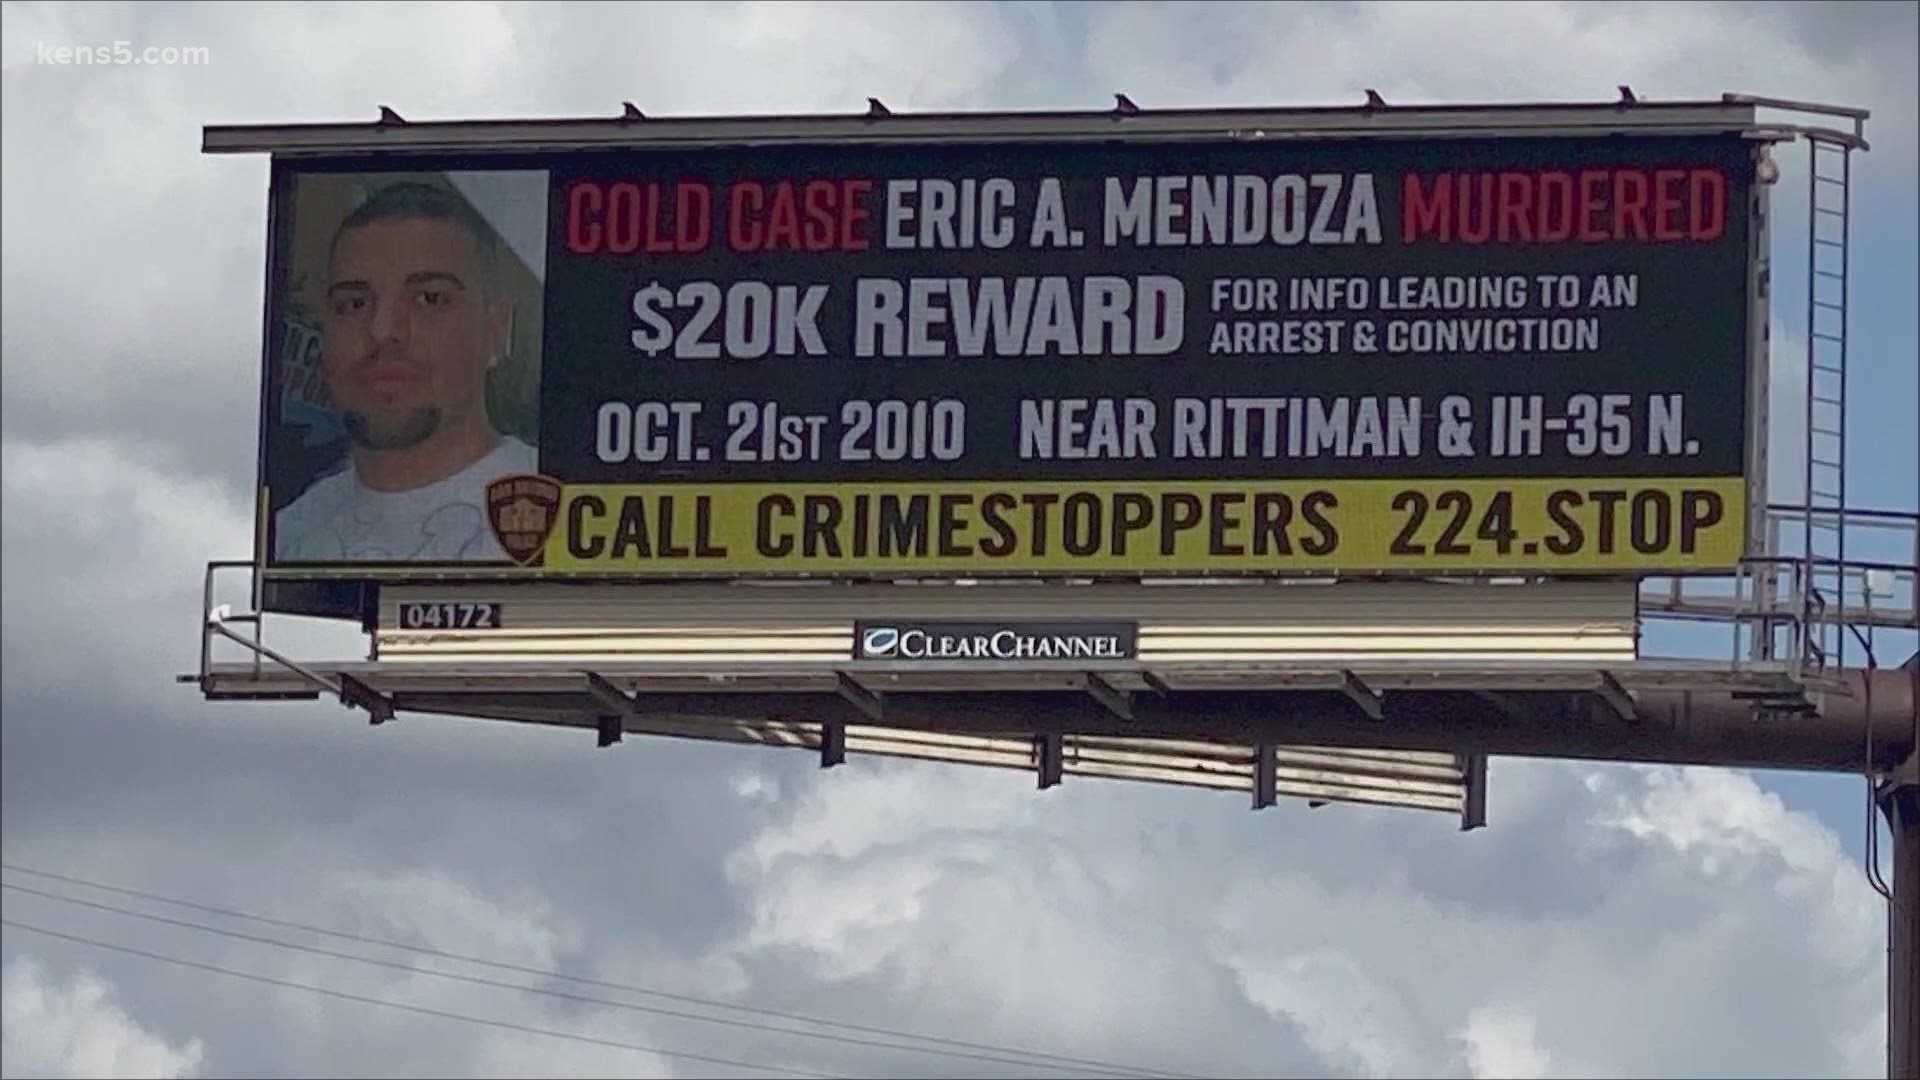 Crime Stoppers and Eric Mendoza's family are offering a guaranteed $20,000 for information leading to an arrest and conviction in Mendoza's murder.